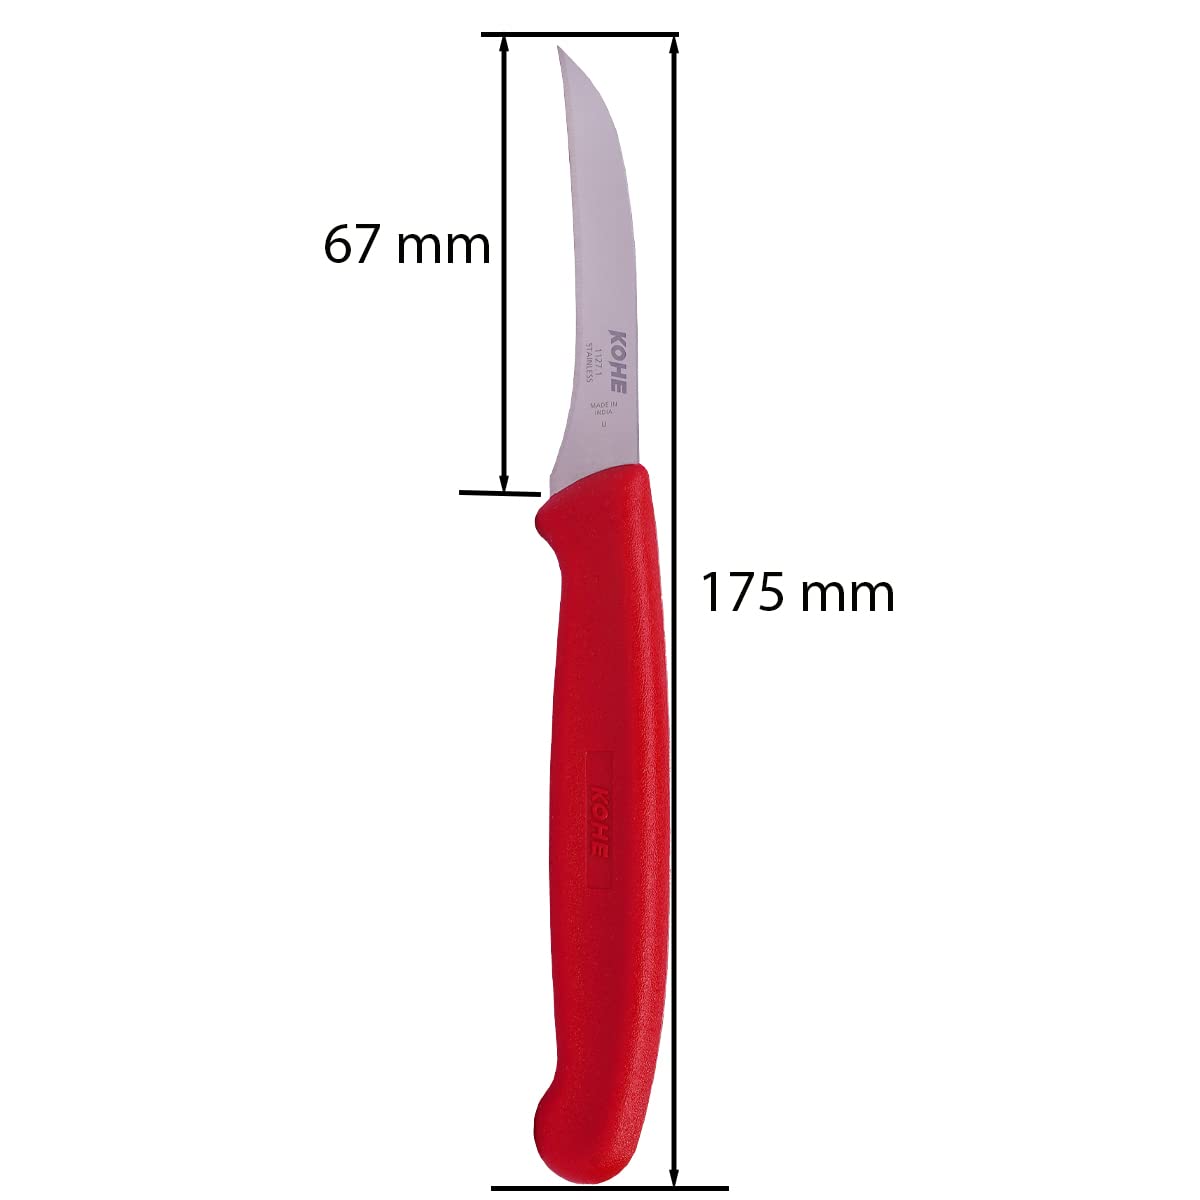 Kohe Stainless Steel Large Paring Chef/Kitchen Knife With Multi Purpose Use And Ergonomic Design, Assorted